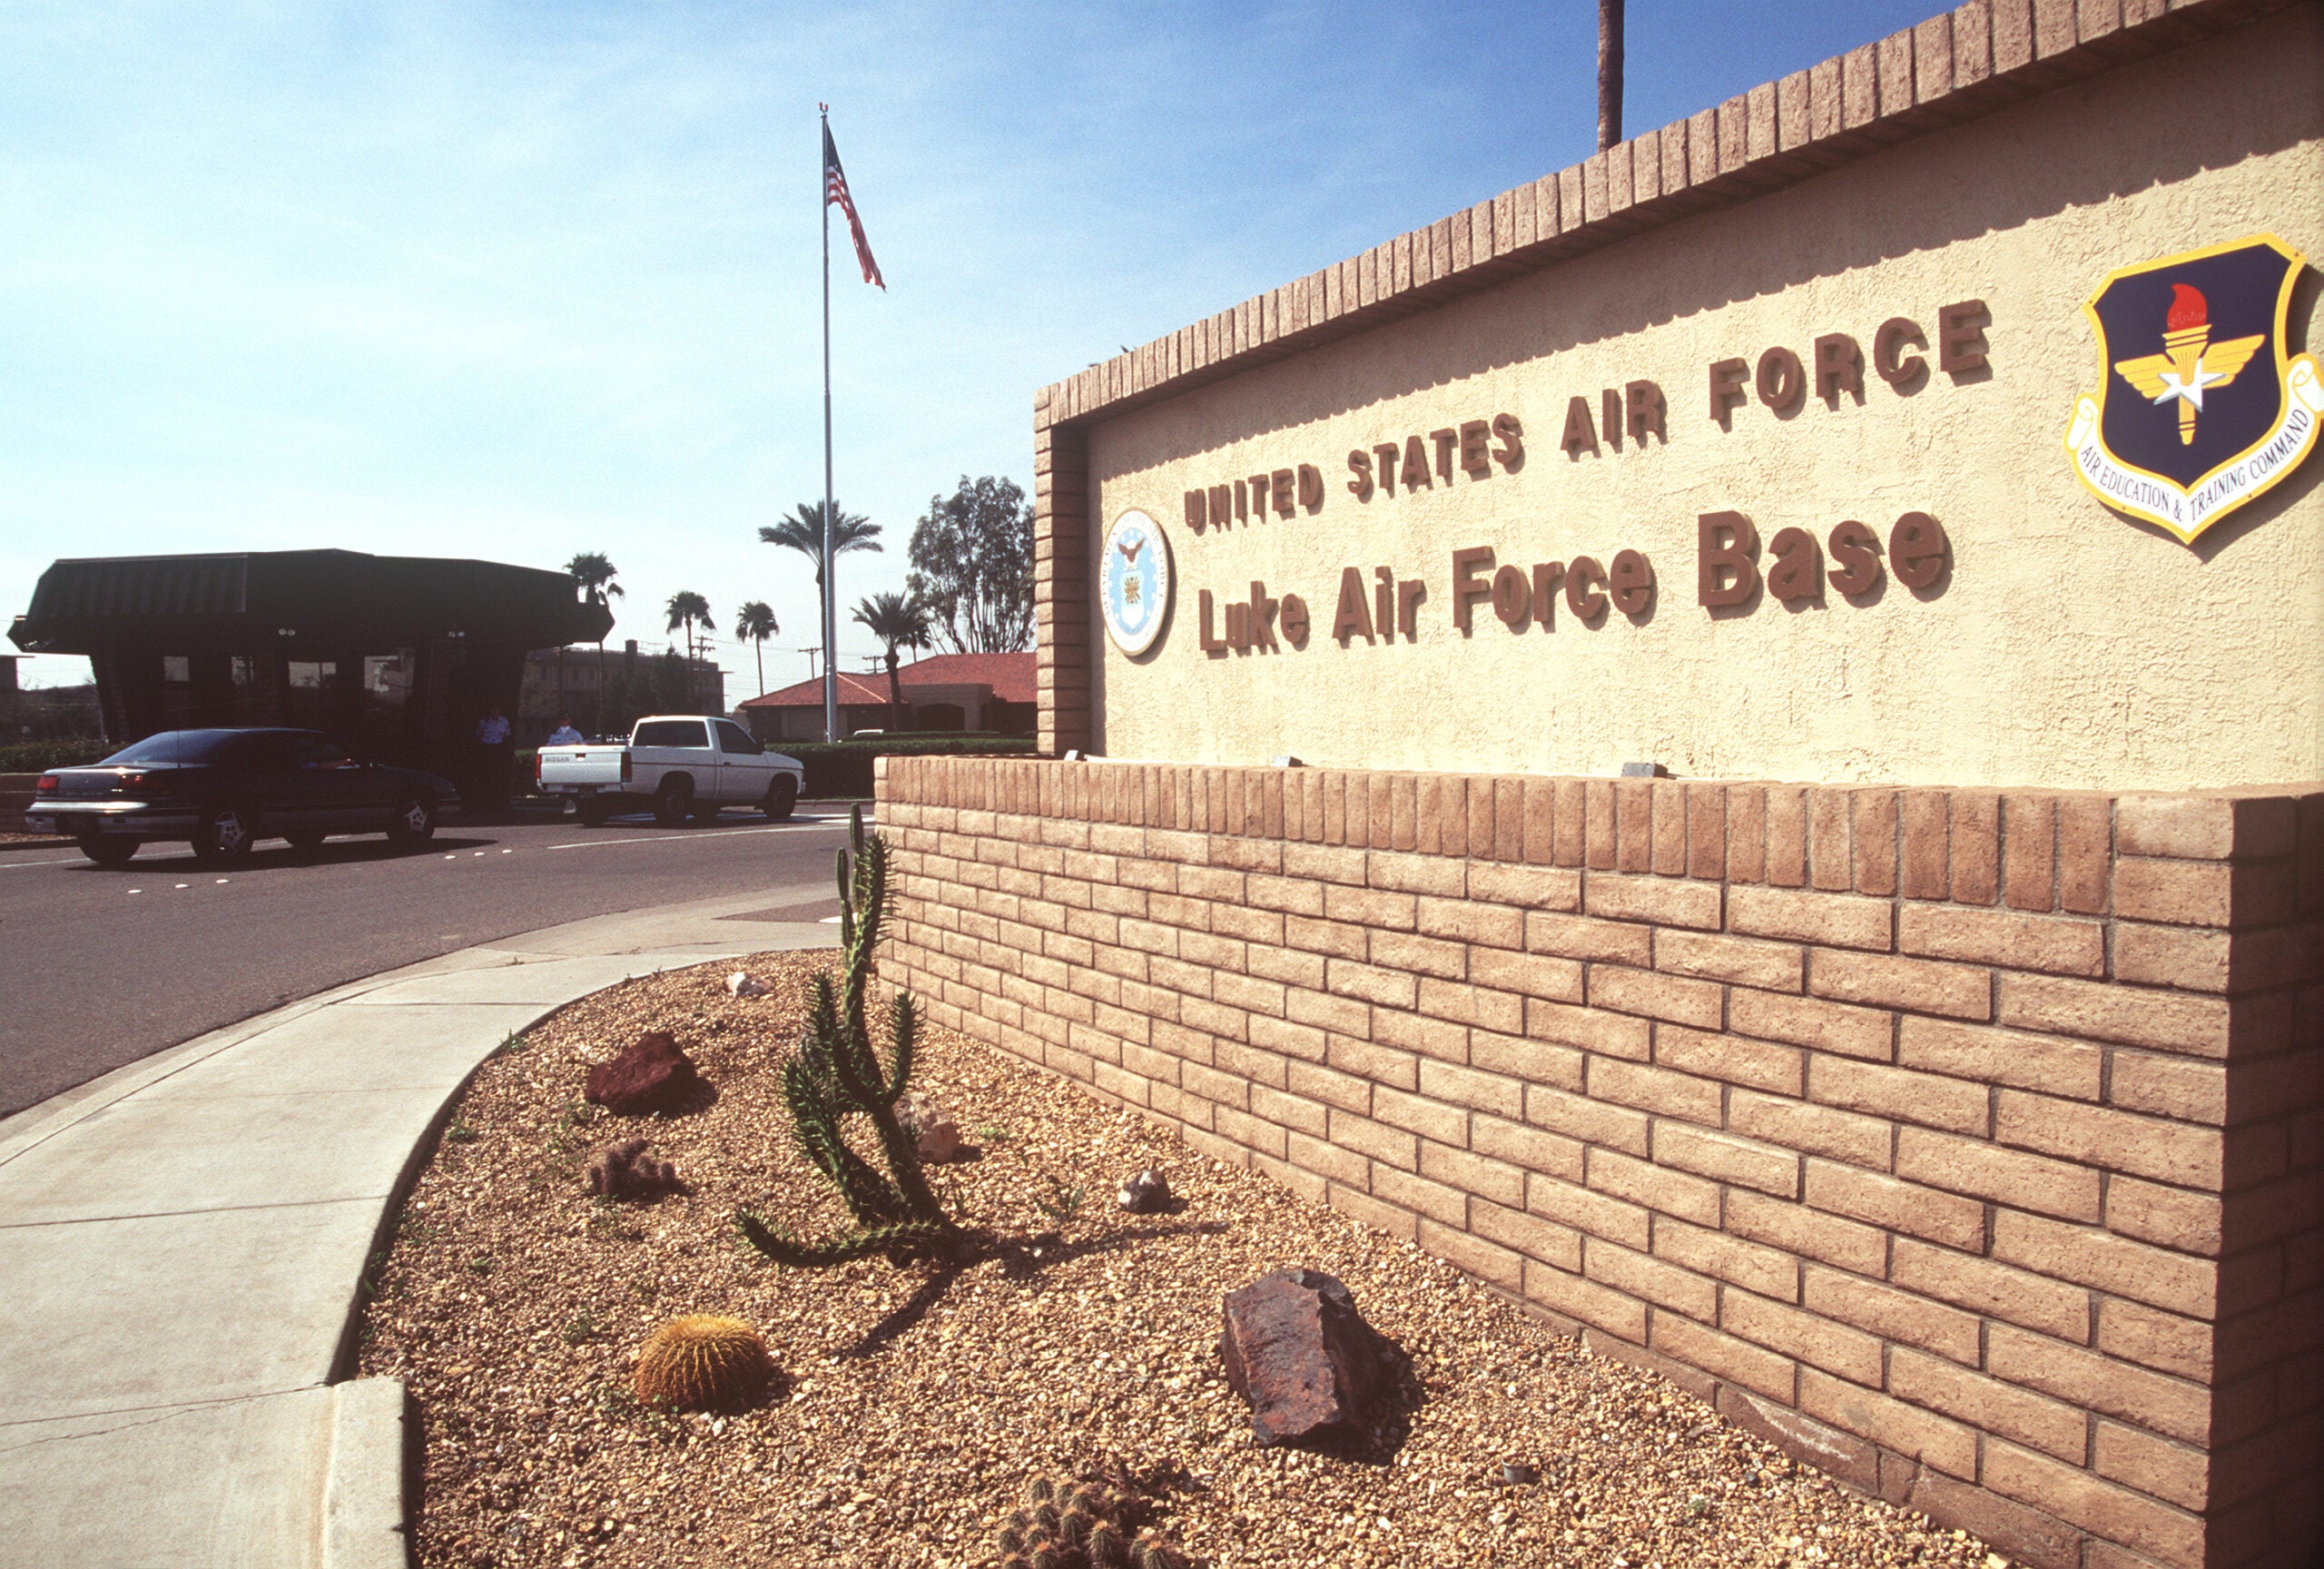 The main gate and welcome sign at Luke Air Force Base in Arizona.